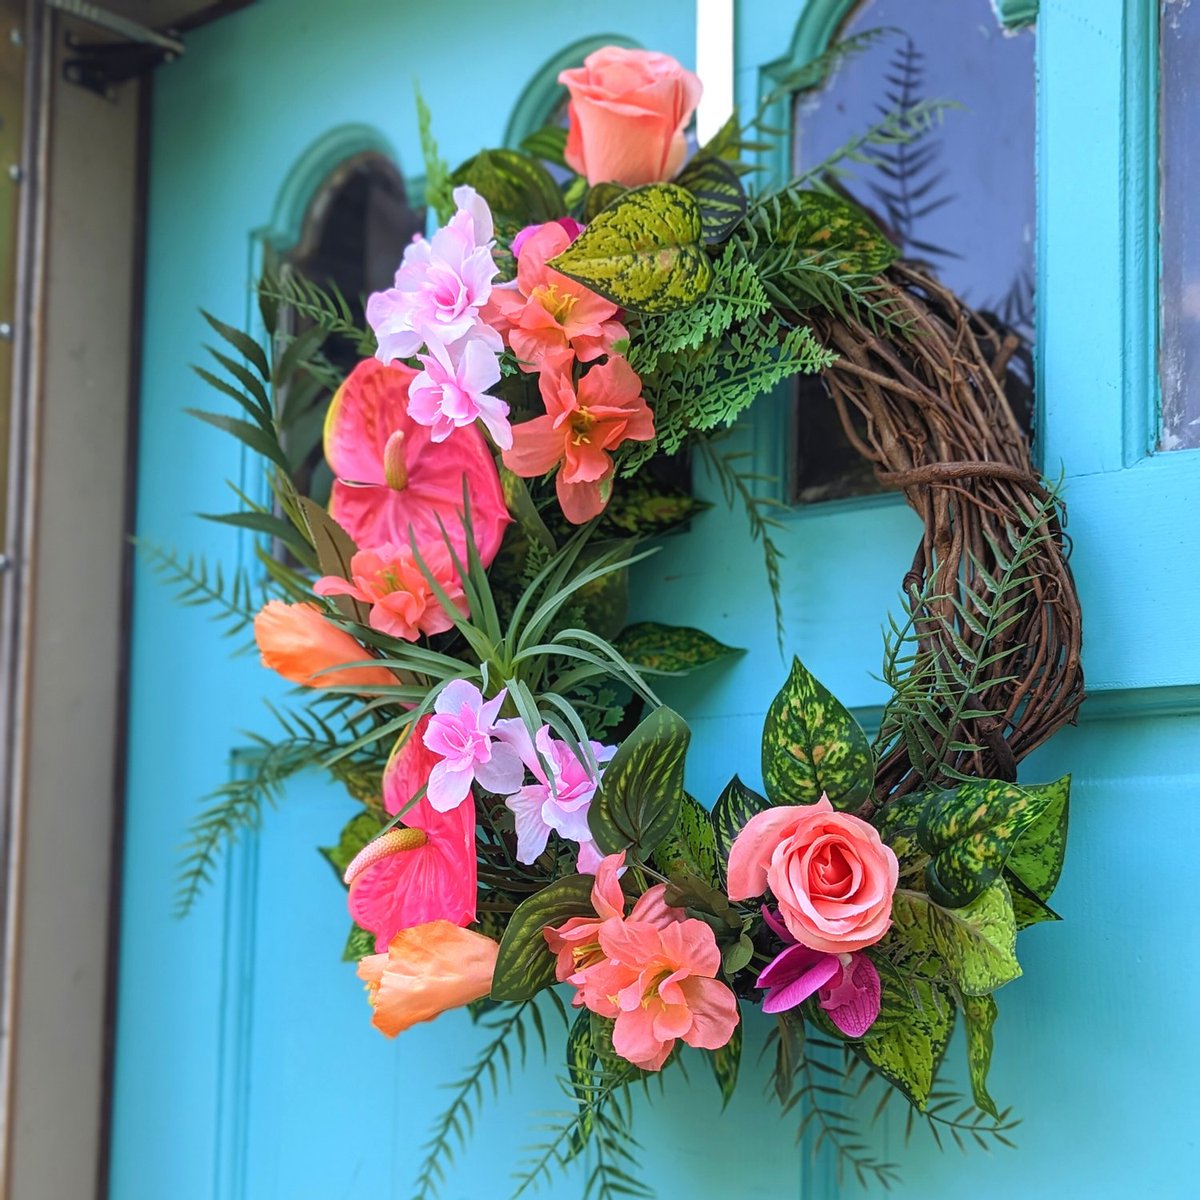 Excited to share the latest addition to my #etsy shop: Pink and Orange Summer Wreath, Exotic Floral Wreath, Protea Wreath, Succulent Wreath etsy.me/3M1QPMI #pink #housewarming #circle #orange #coastaltropical #summer #artificial #frontdoorwreath #tropicalwreath